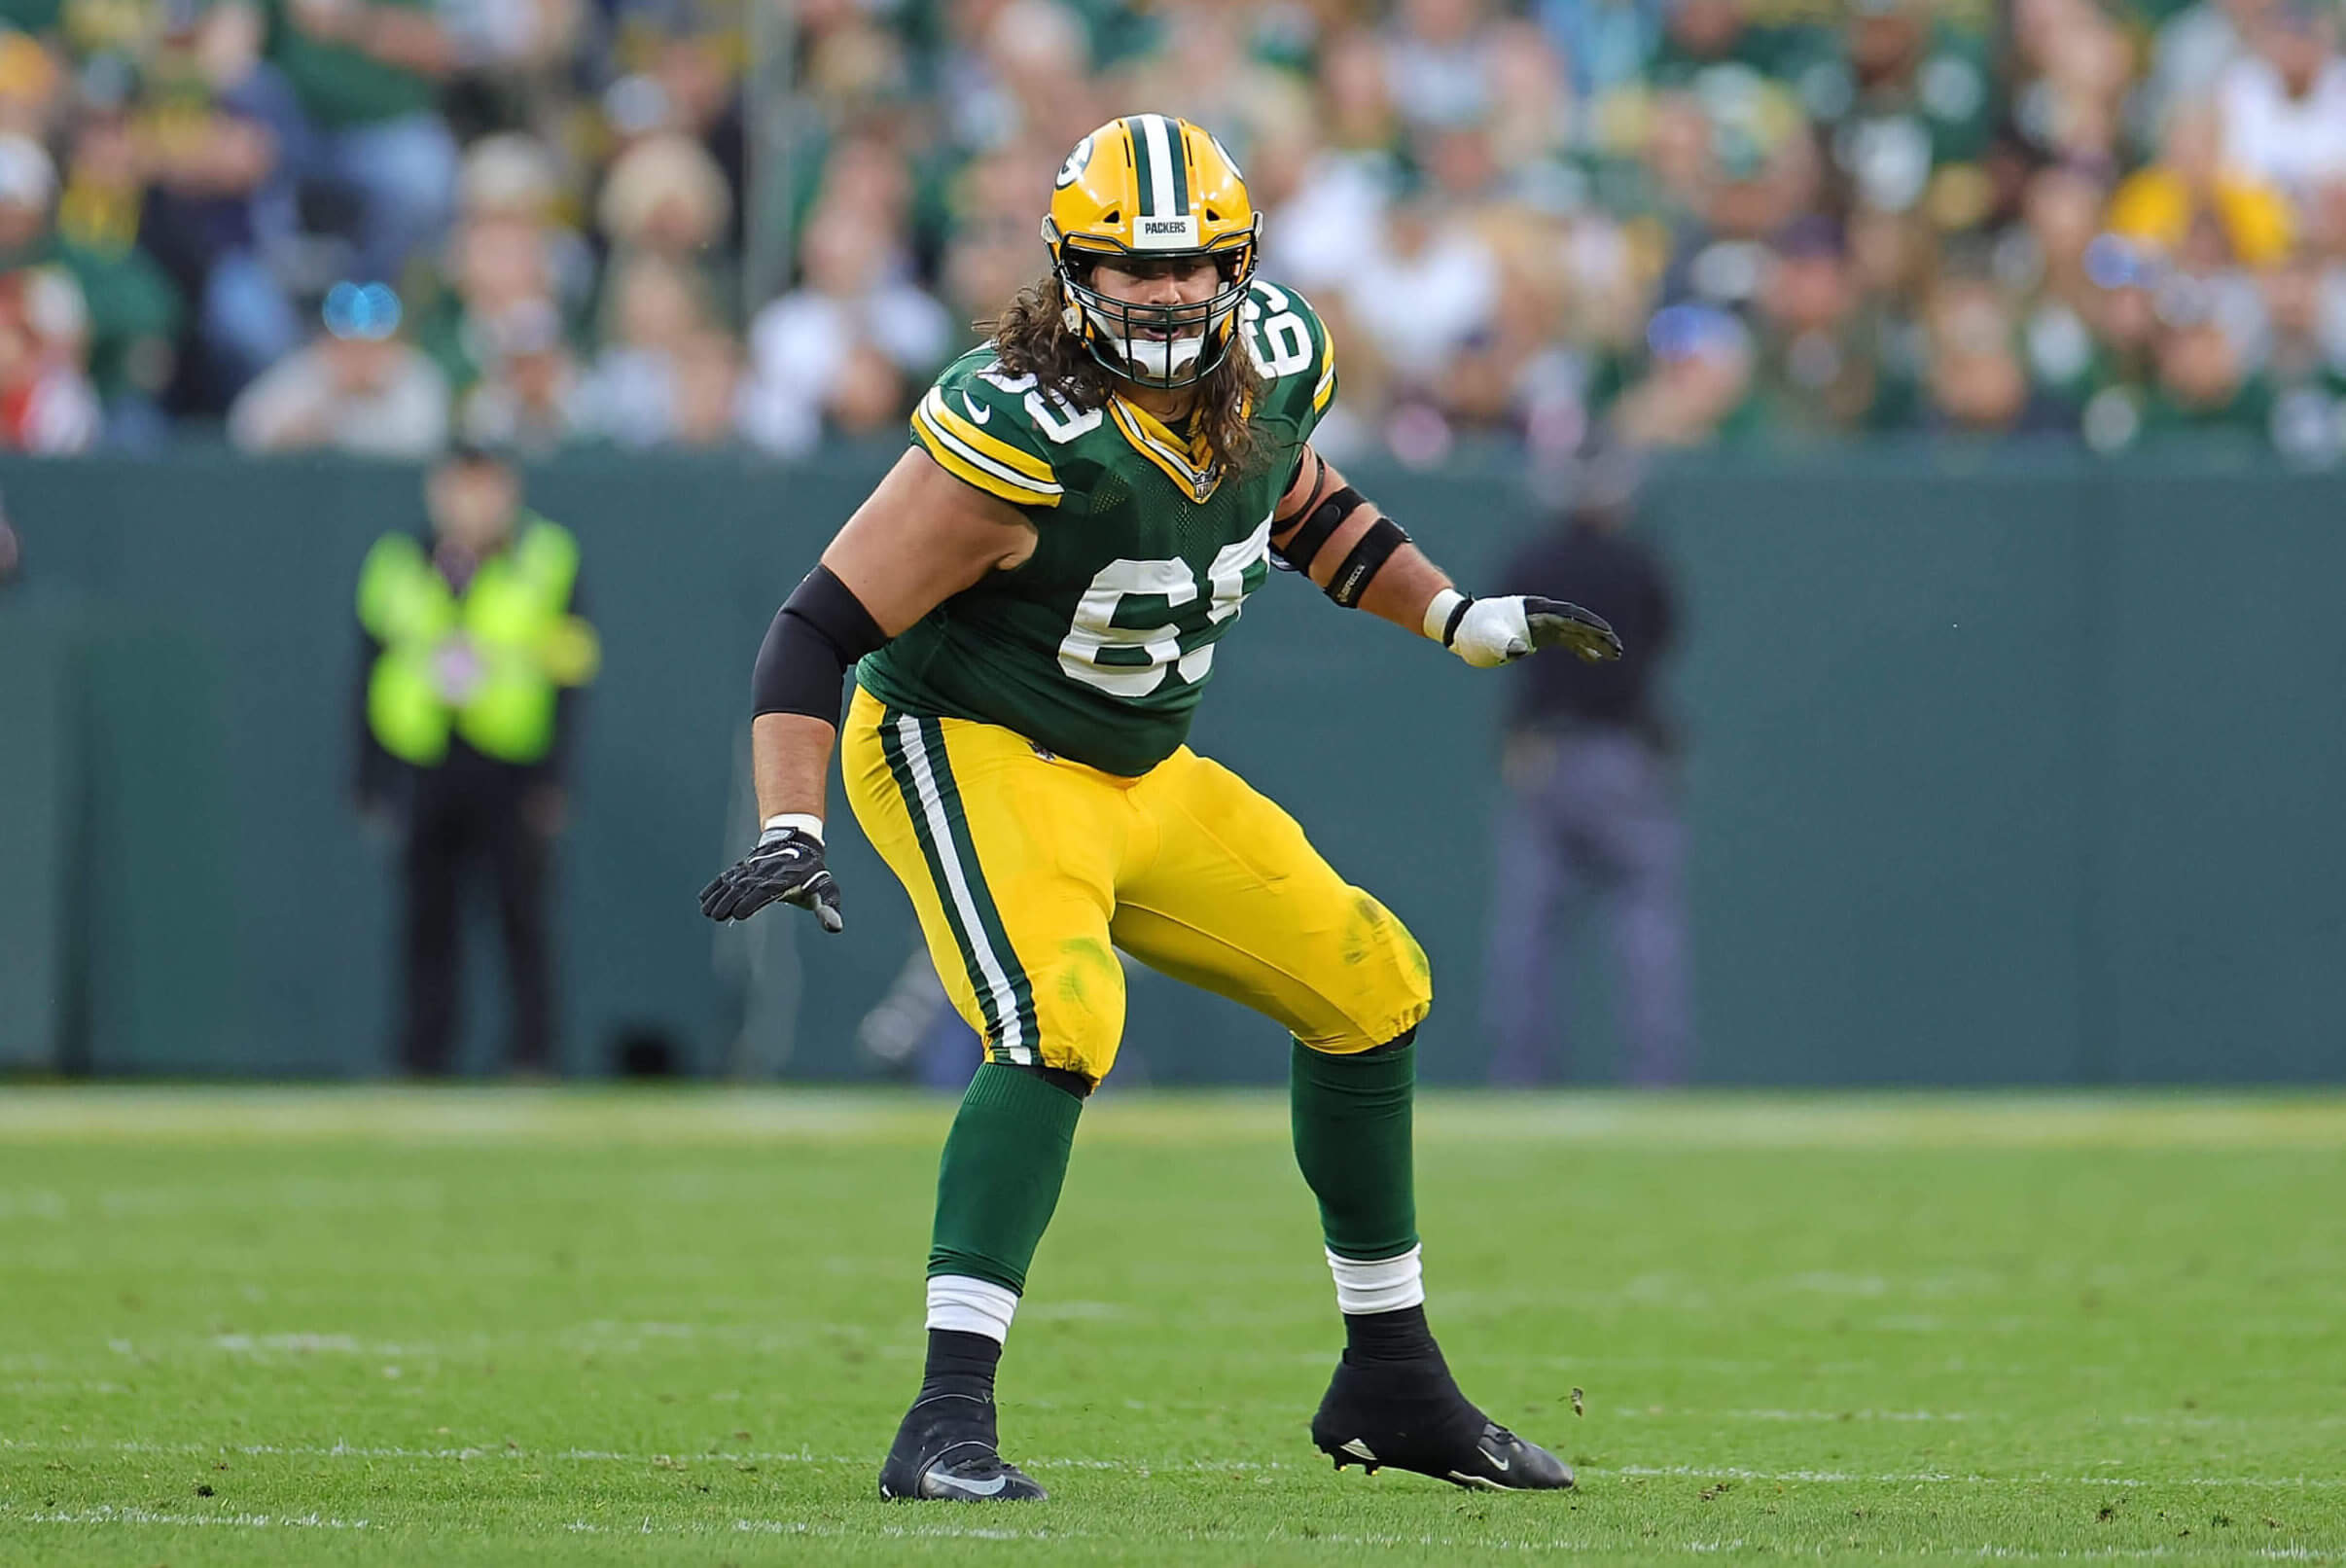  Packers' Strategic Moves in the Upcoming NFL Draft: A Look at the Backup Plan for David Bakhtiari's Replacement